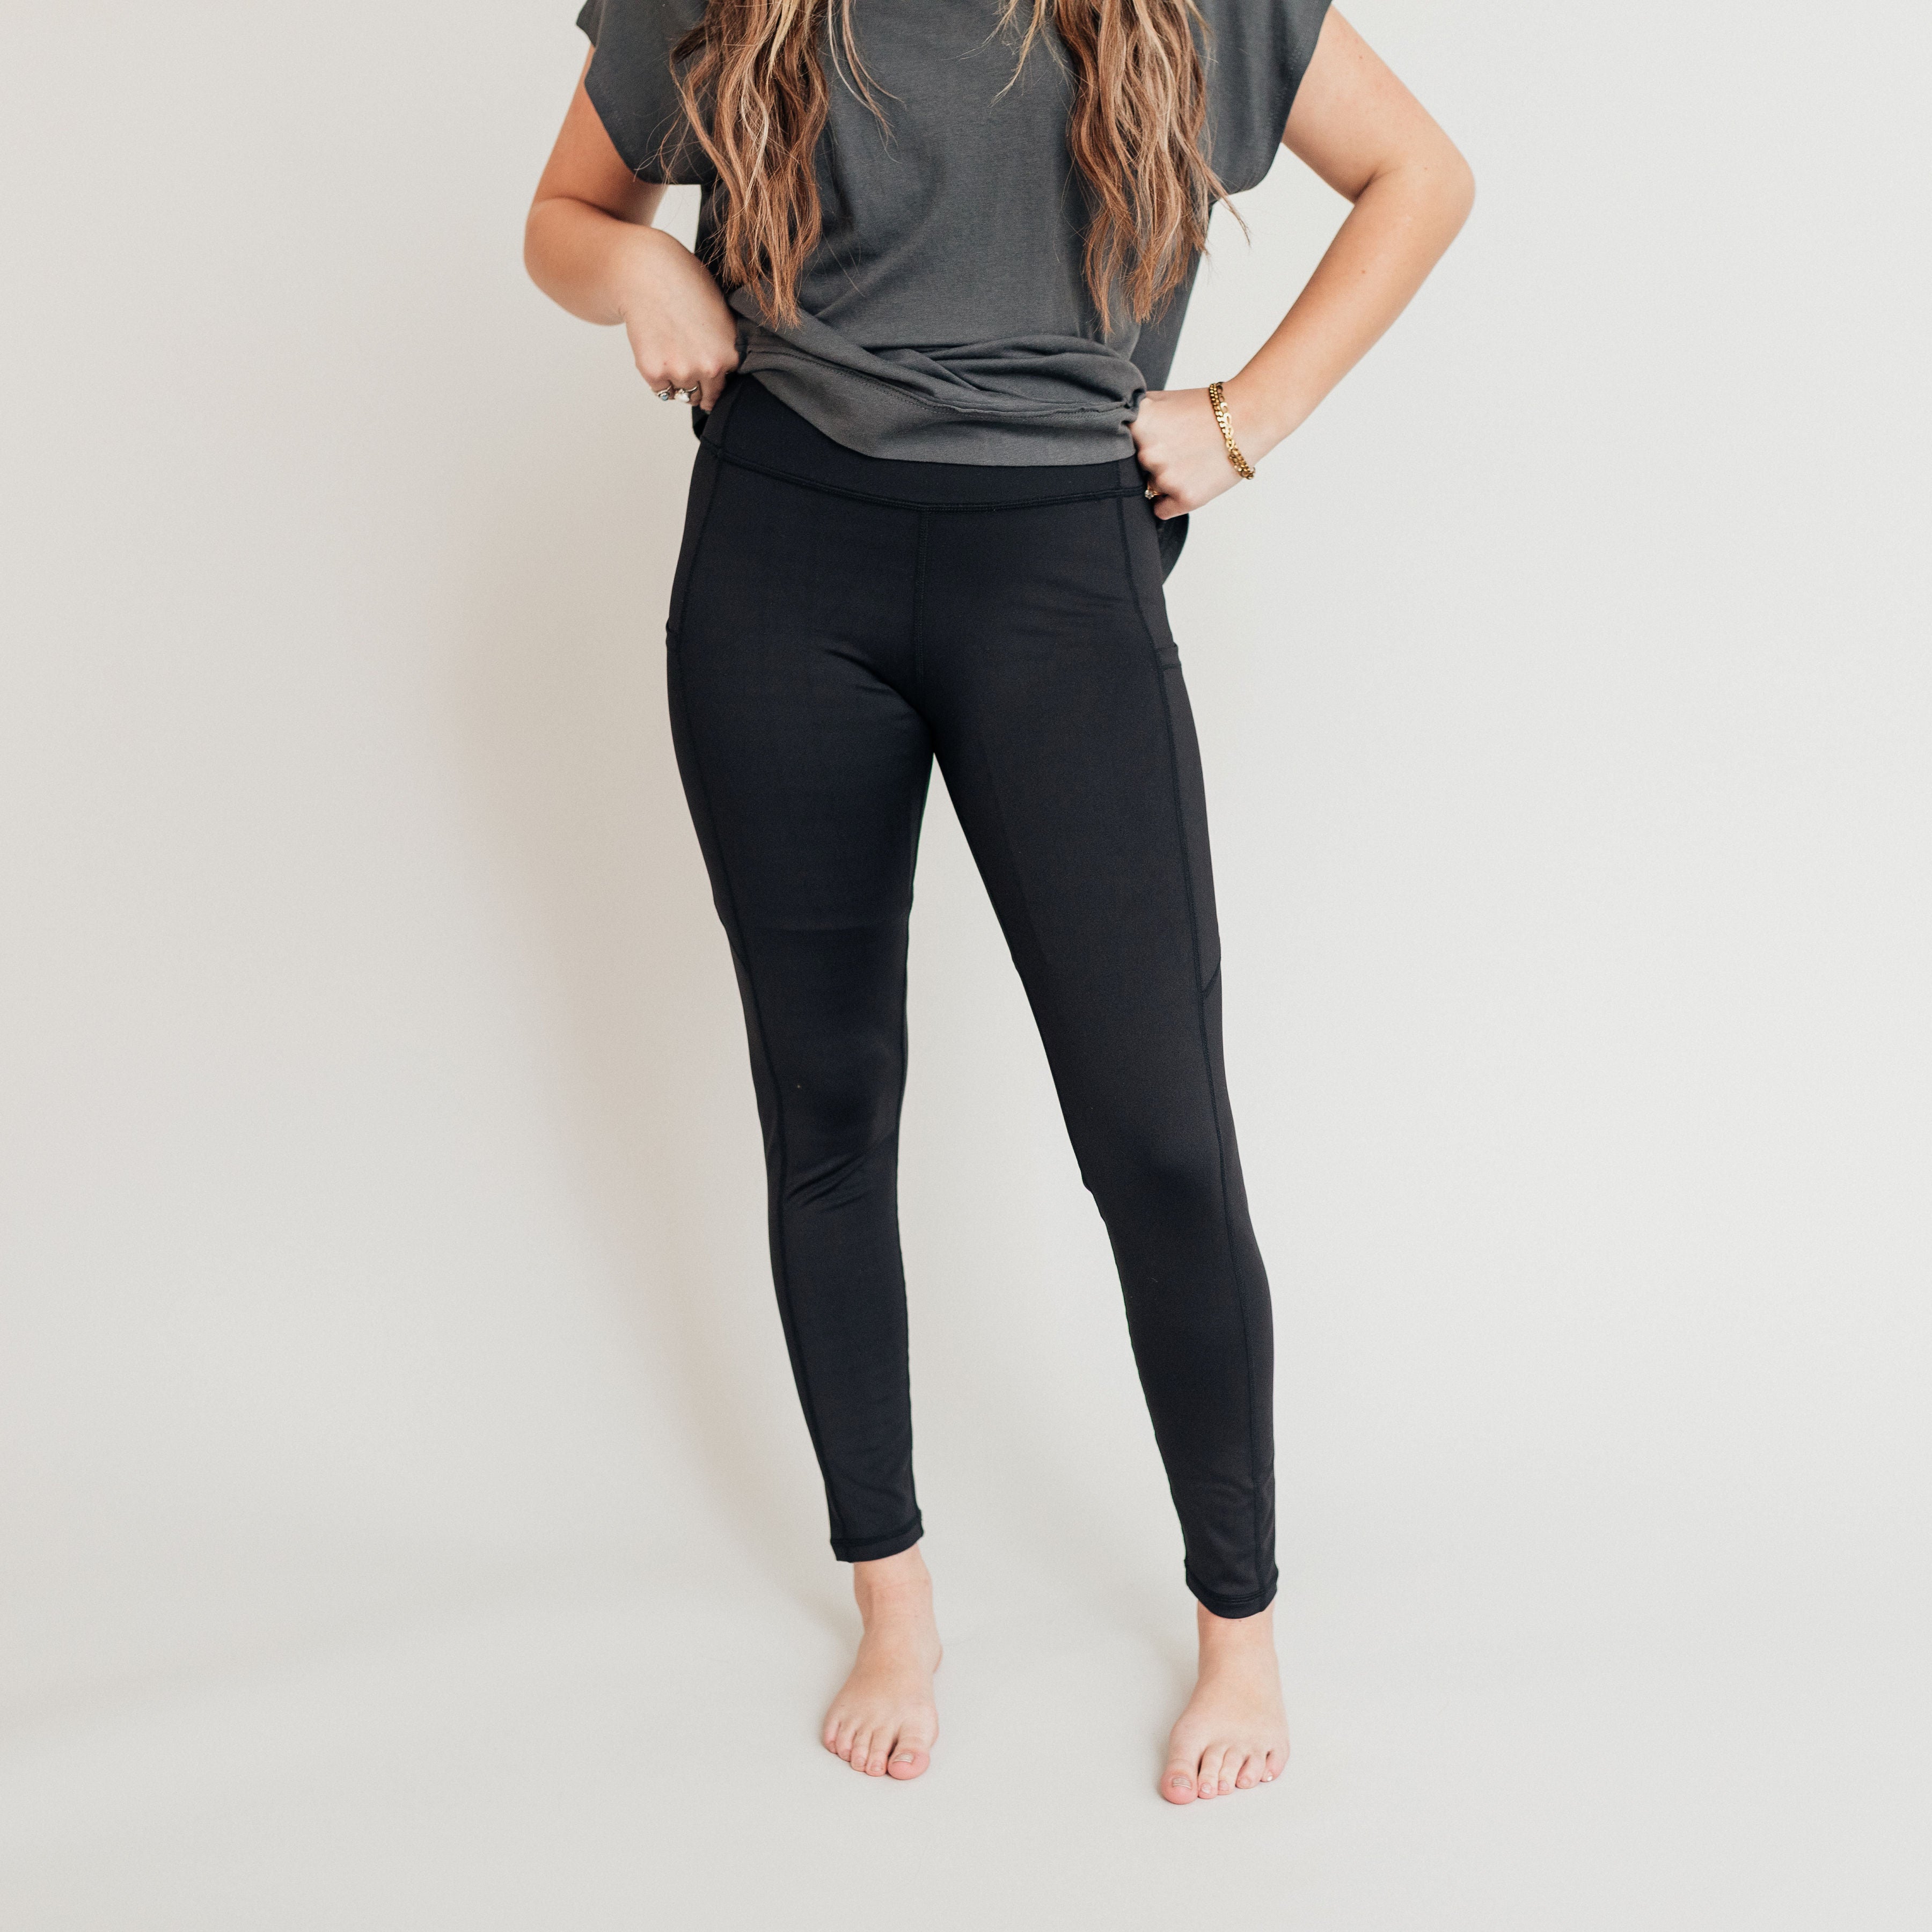 Active Leggings *ALL SALES FINAL* (Size S to XL Left)